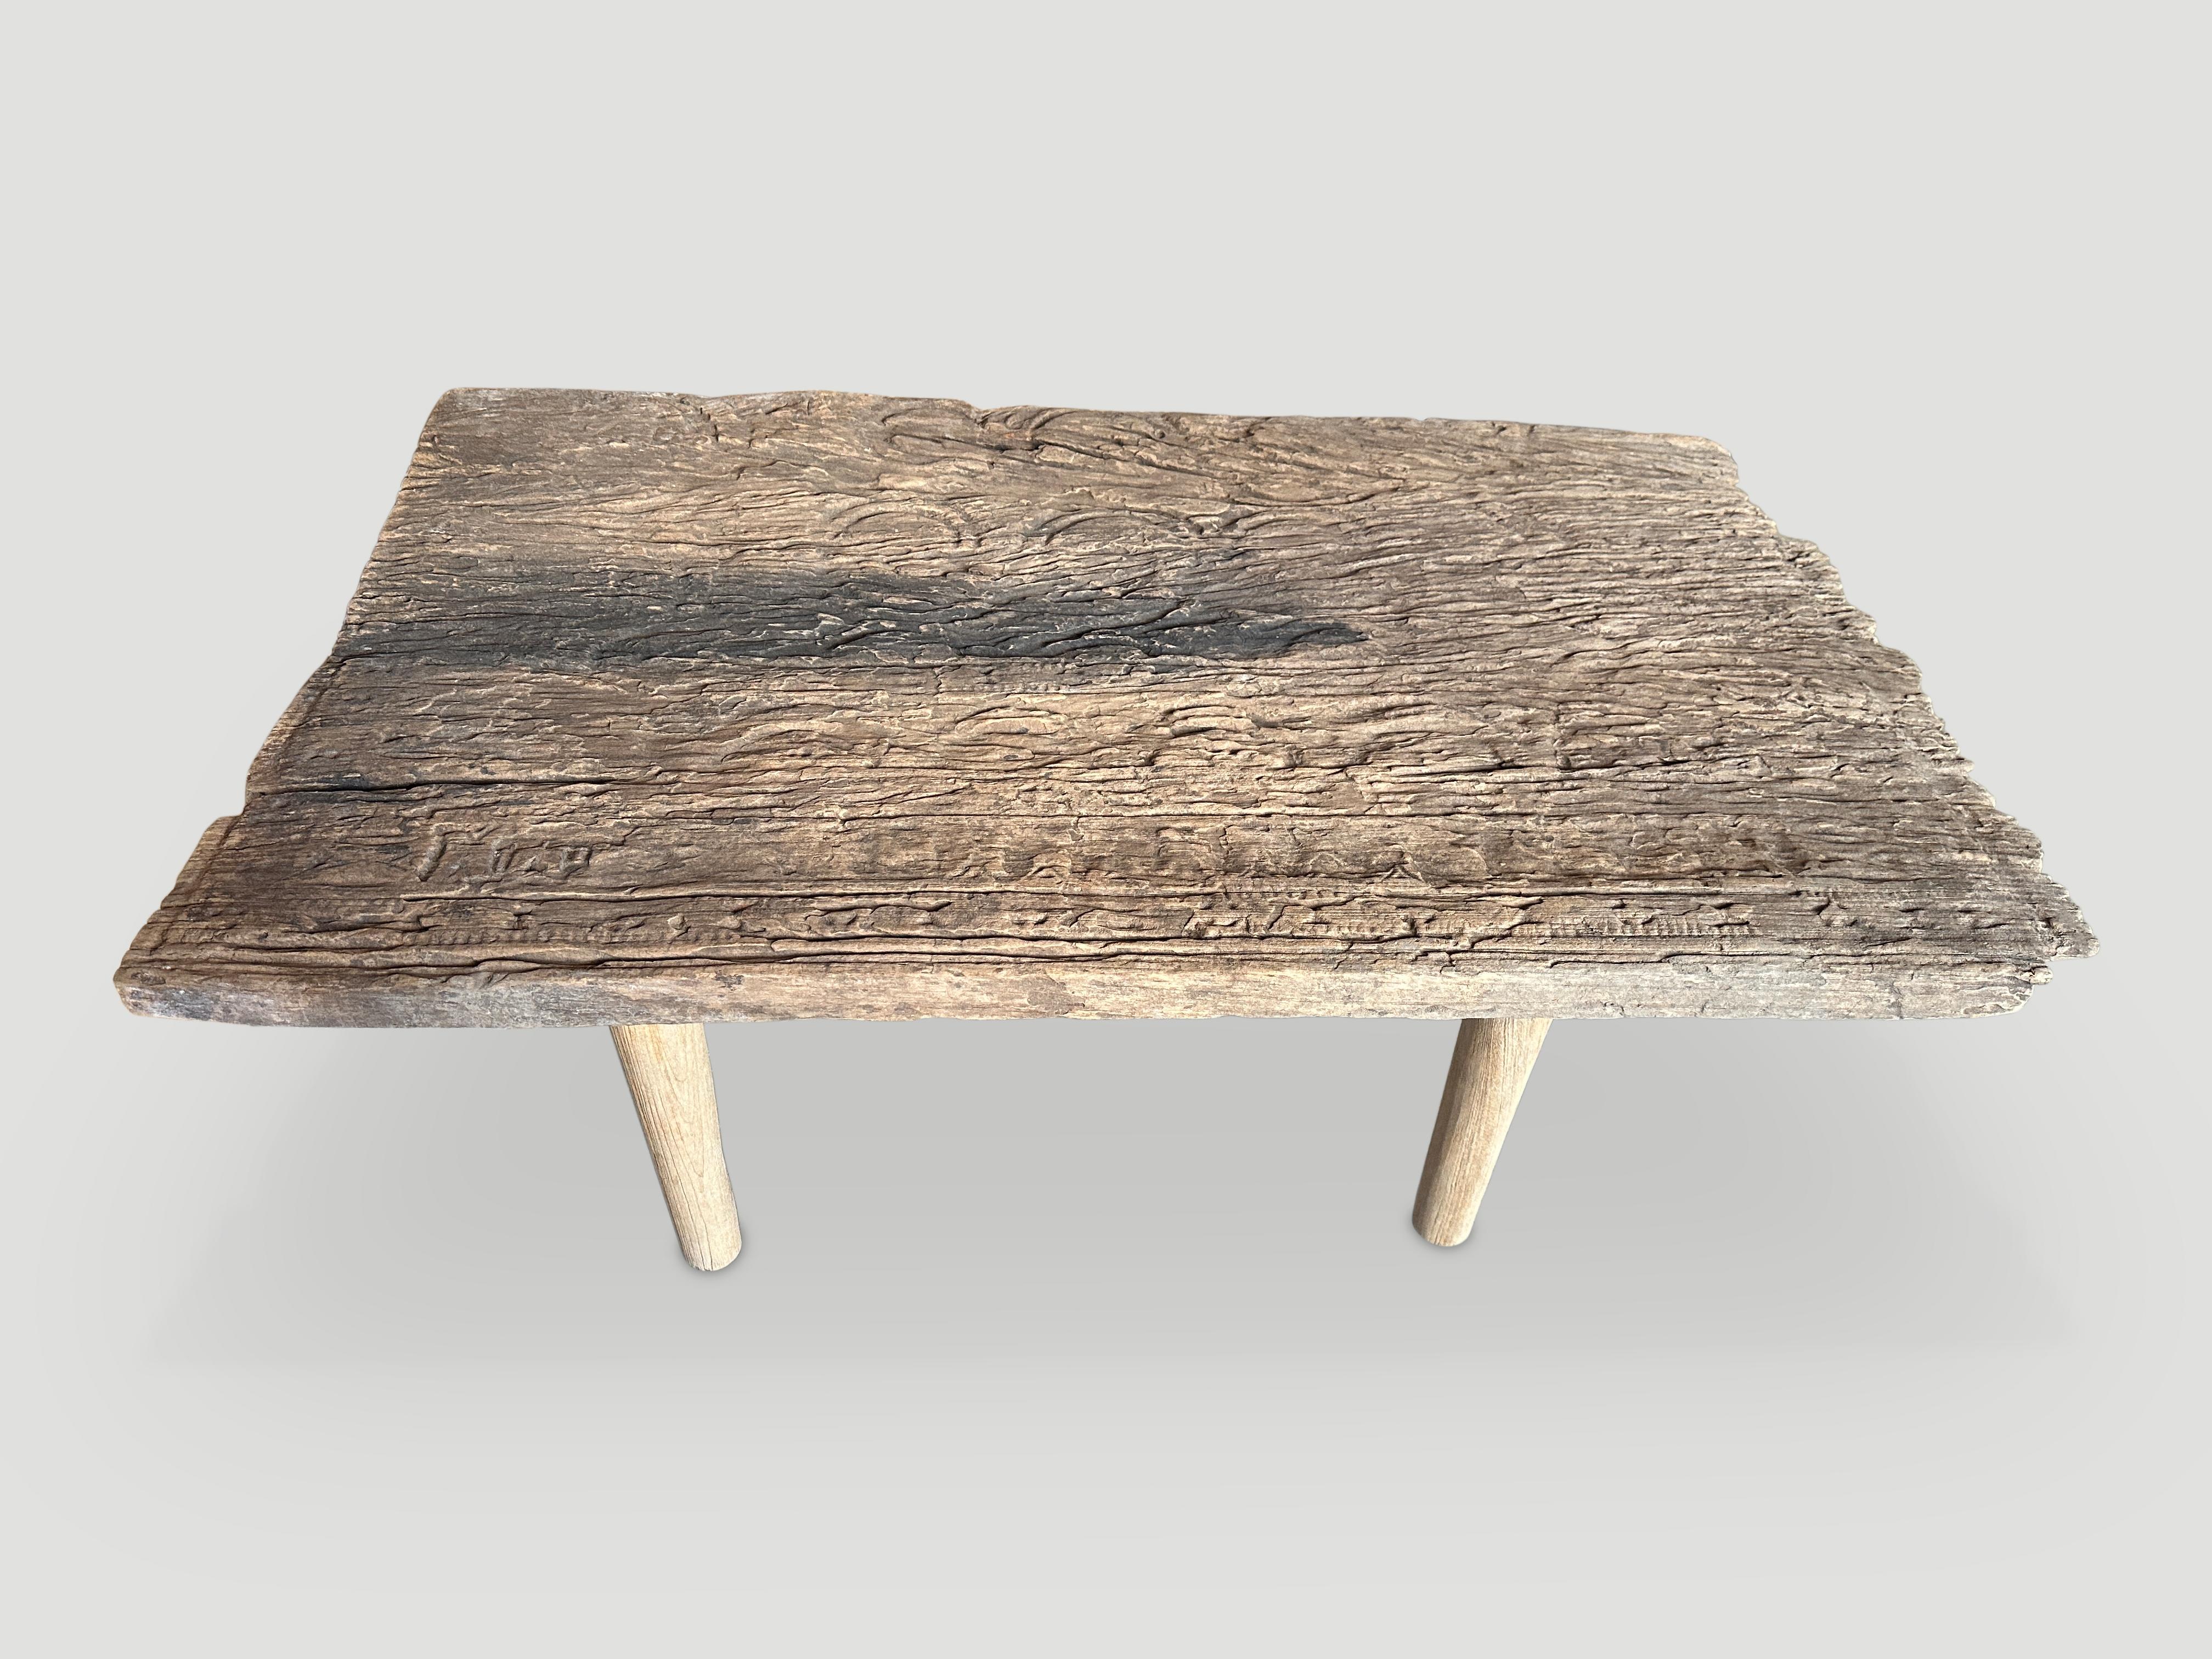 Beautiful Wabi Sabi hand carved coffee table. We added minimalist legs to this single wood piece originally used as an architectural panel. 

This coffee table was hand made in the spirit of Wabi Sabi, a Japanese philosophy that beauty can be found